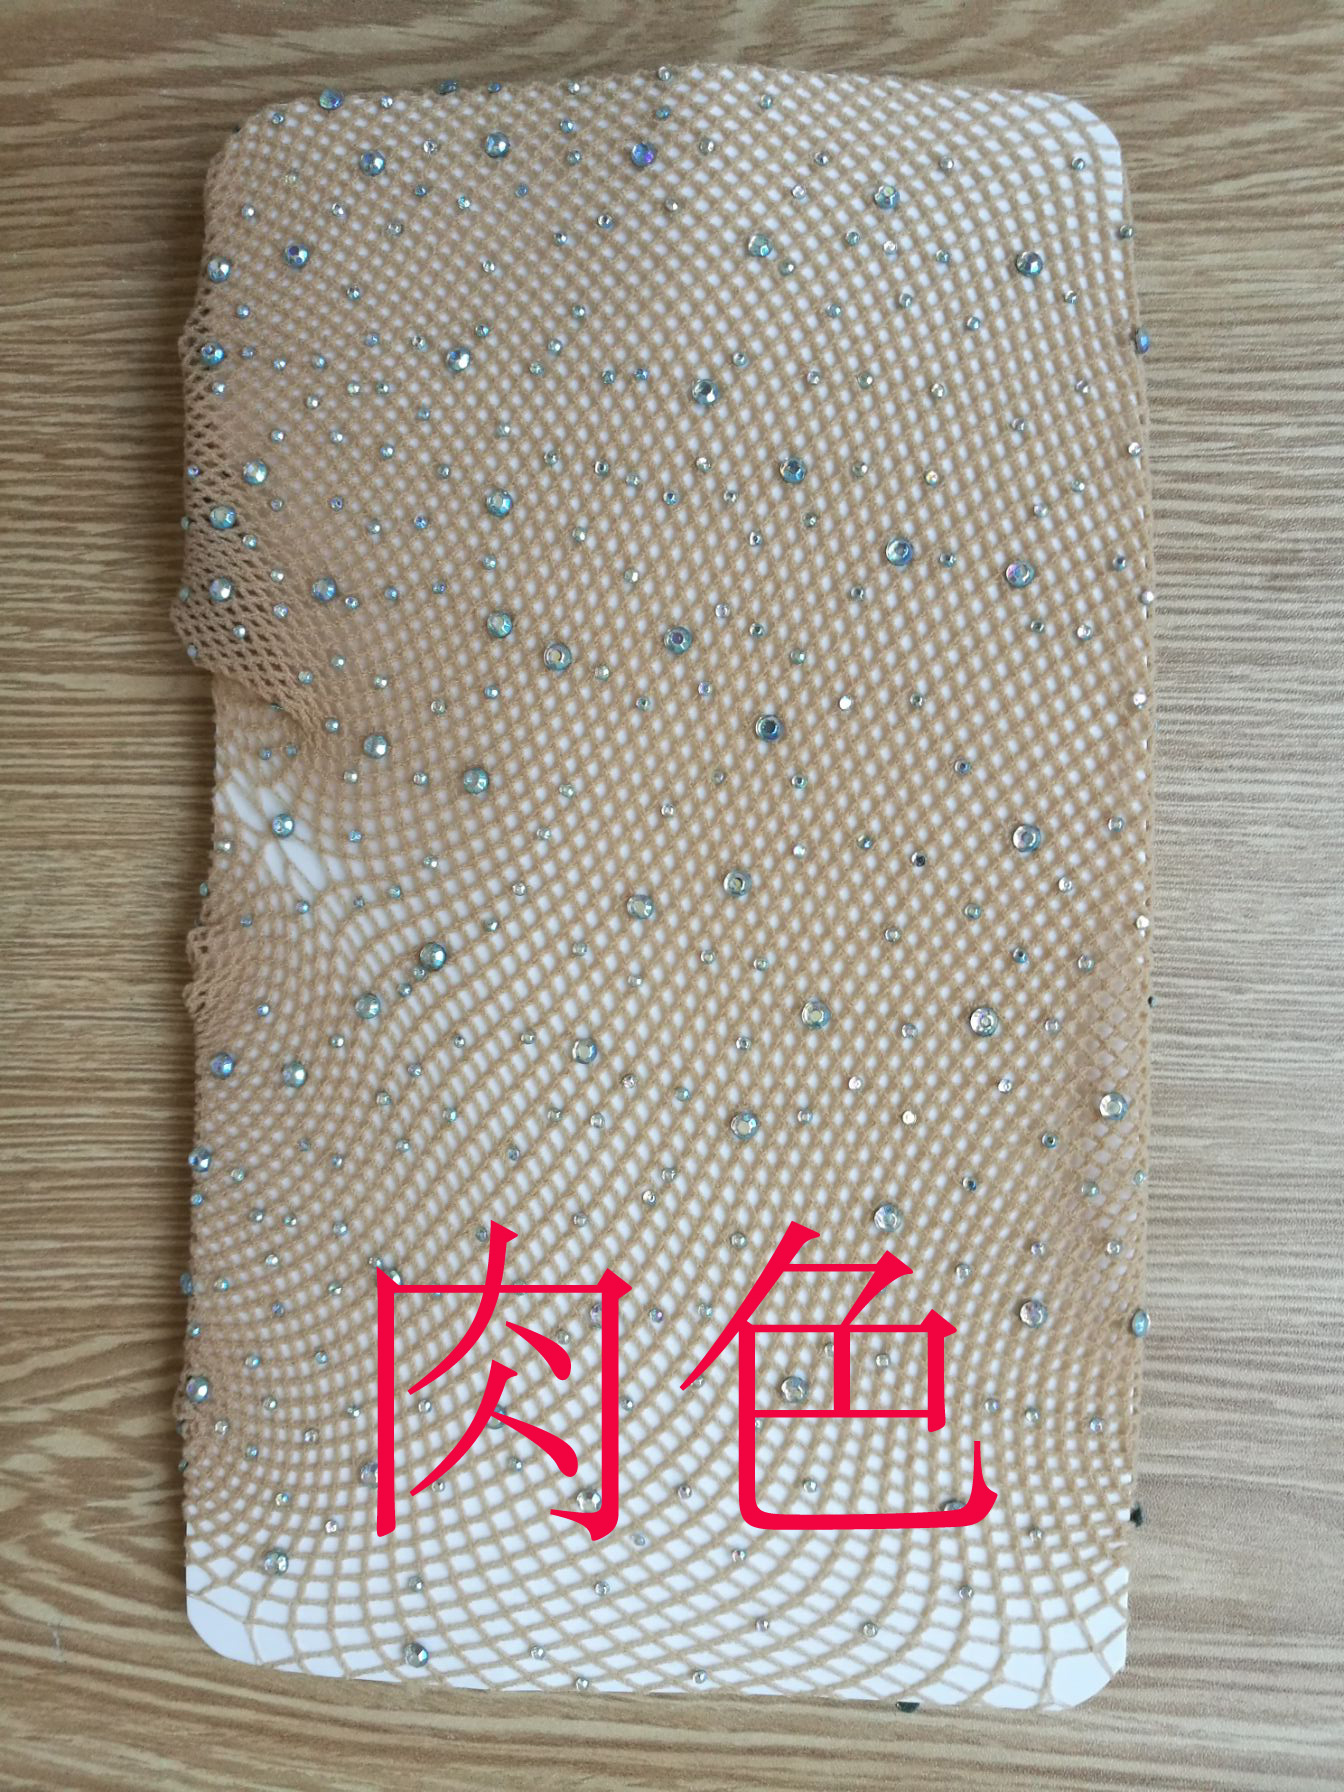 Yue Die Hot Sexy Stockings Hot Drilling Fishnet Pantyhose Starry Sky Colorful Crystals Base Pantyhose Mesh Stockings W28